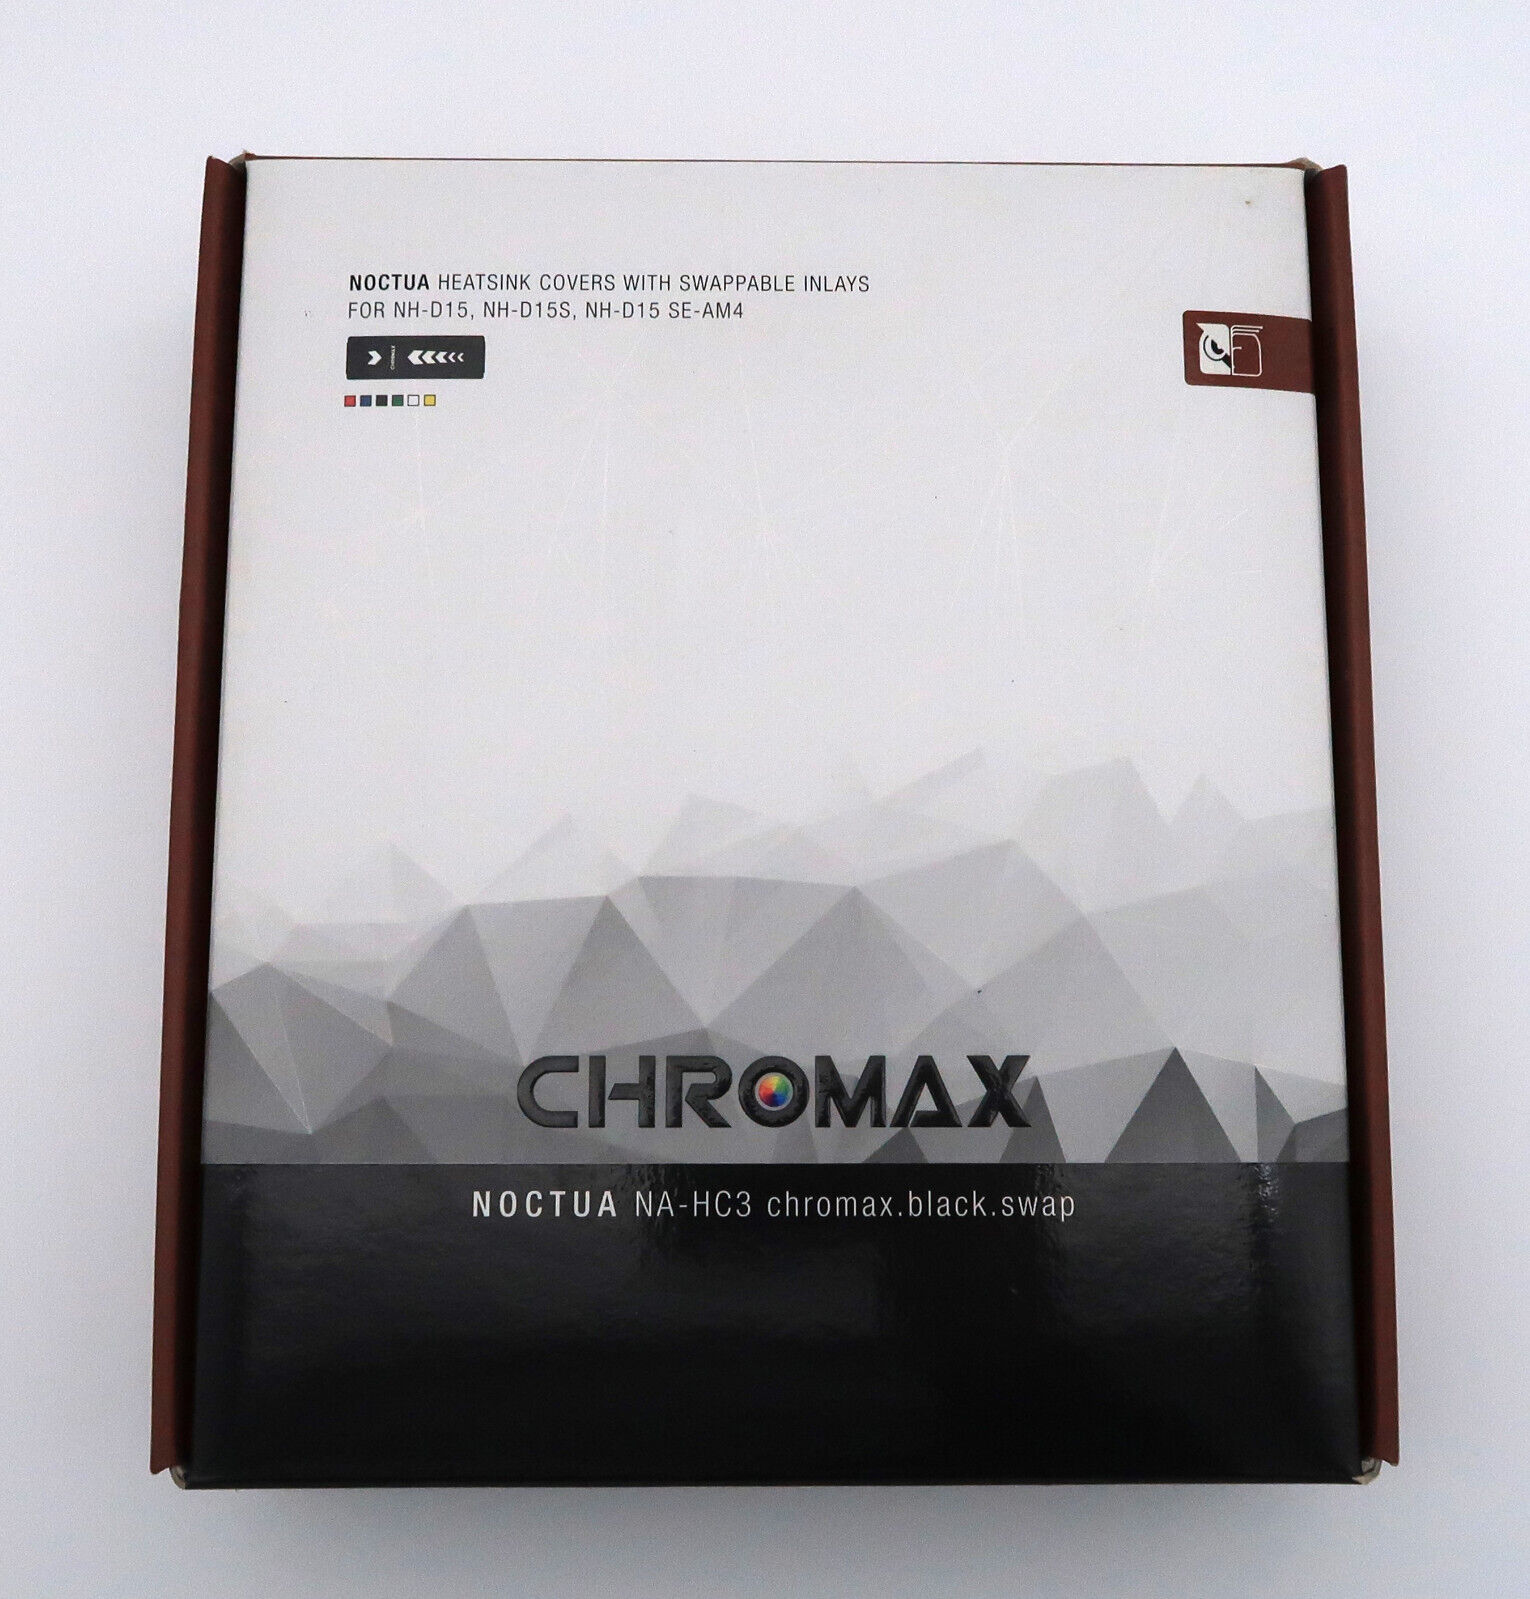 Noctua NA-HC3 Chromax Heatsink Covers with Swappable Inlays NH-D15, NH-D15S